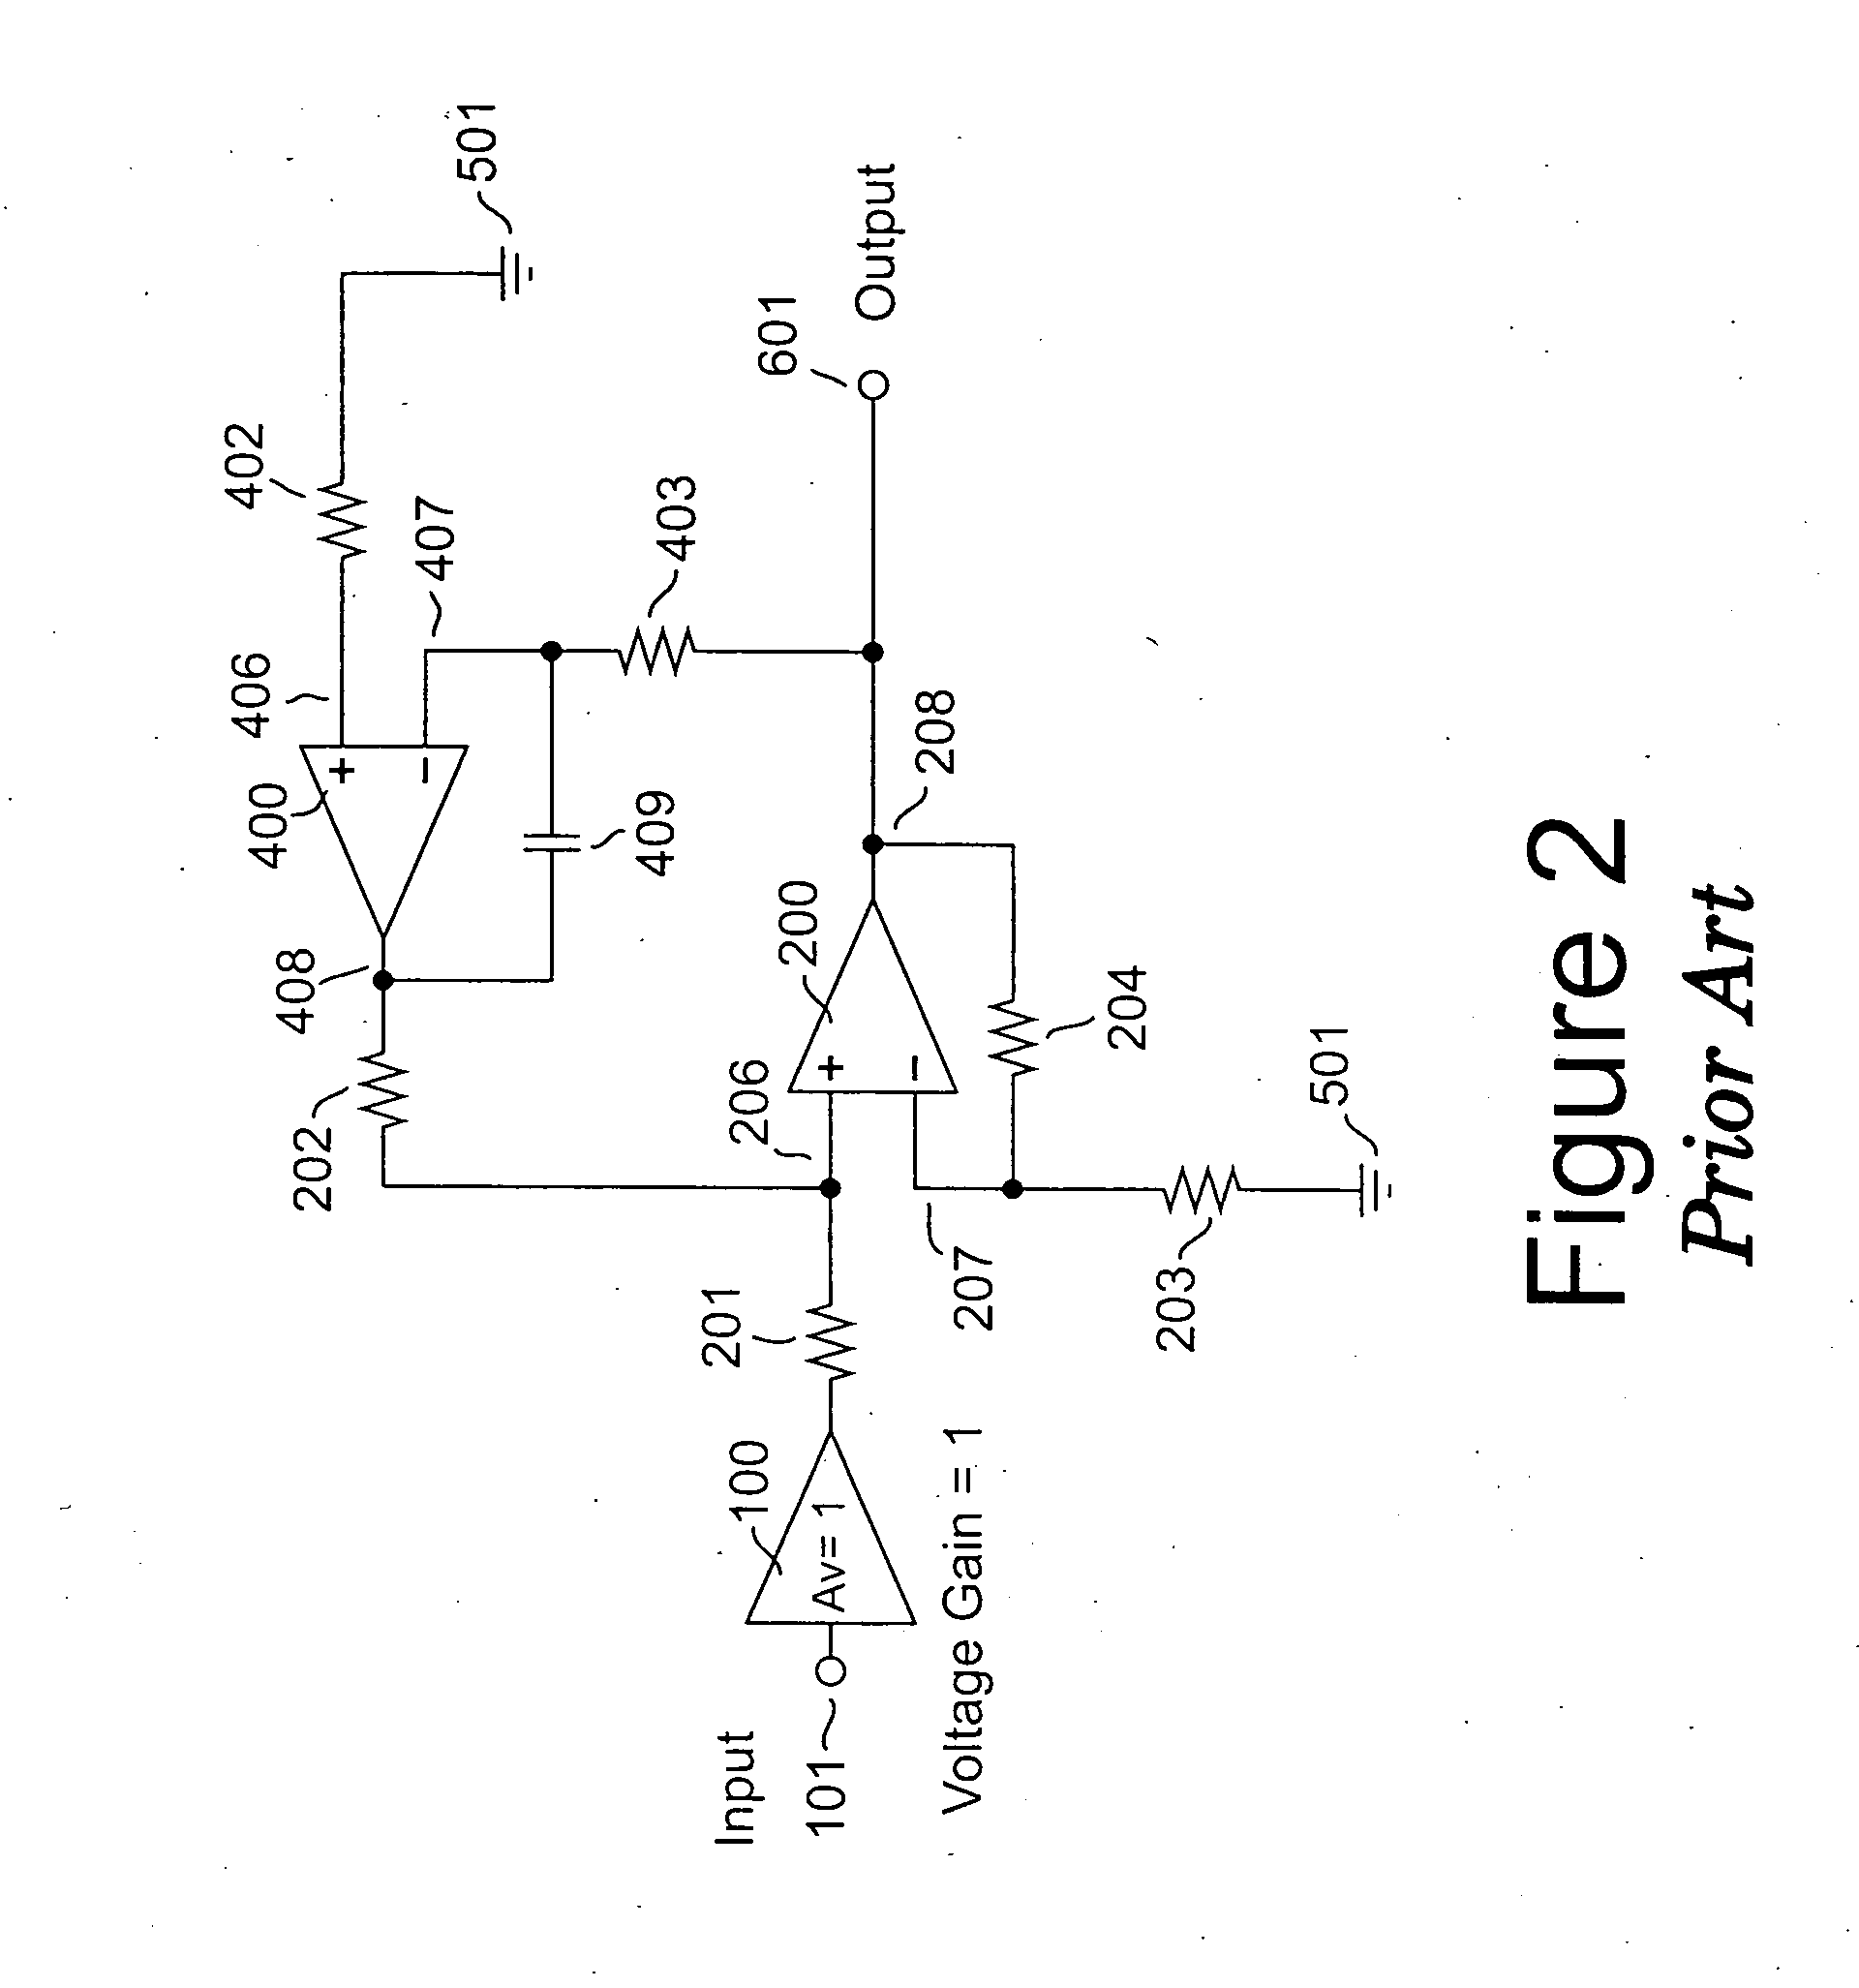 Amplifier system with current-mode servo feedback